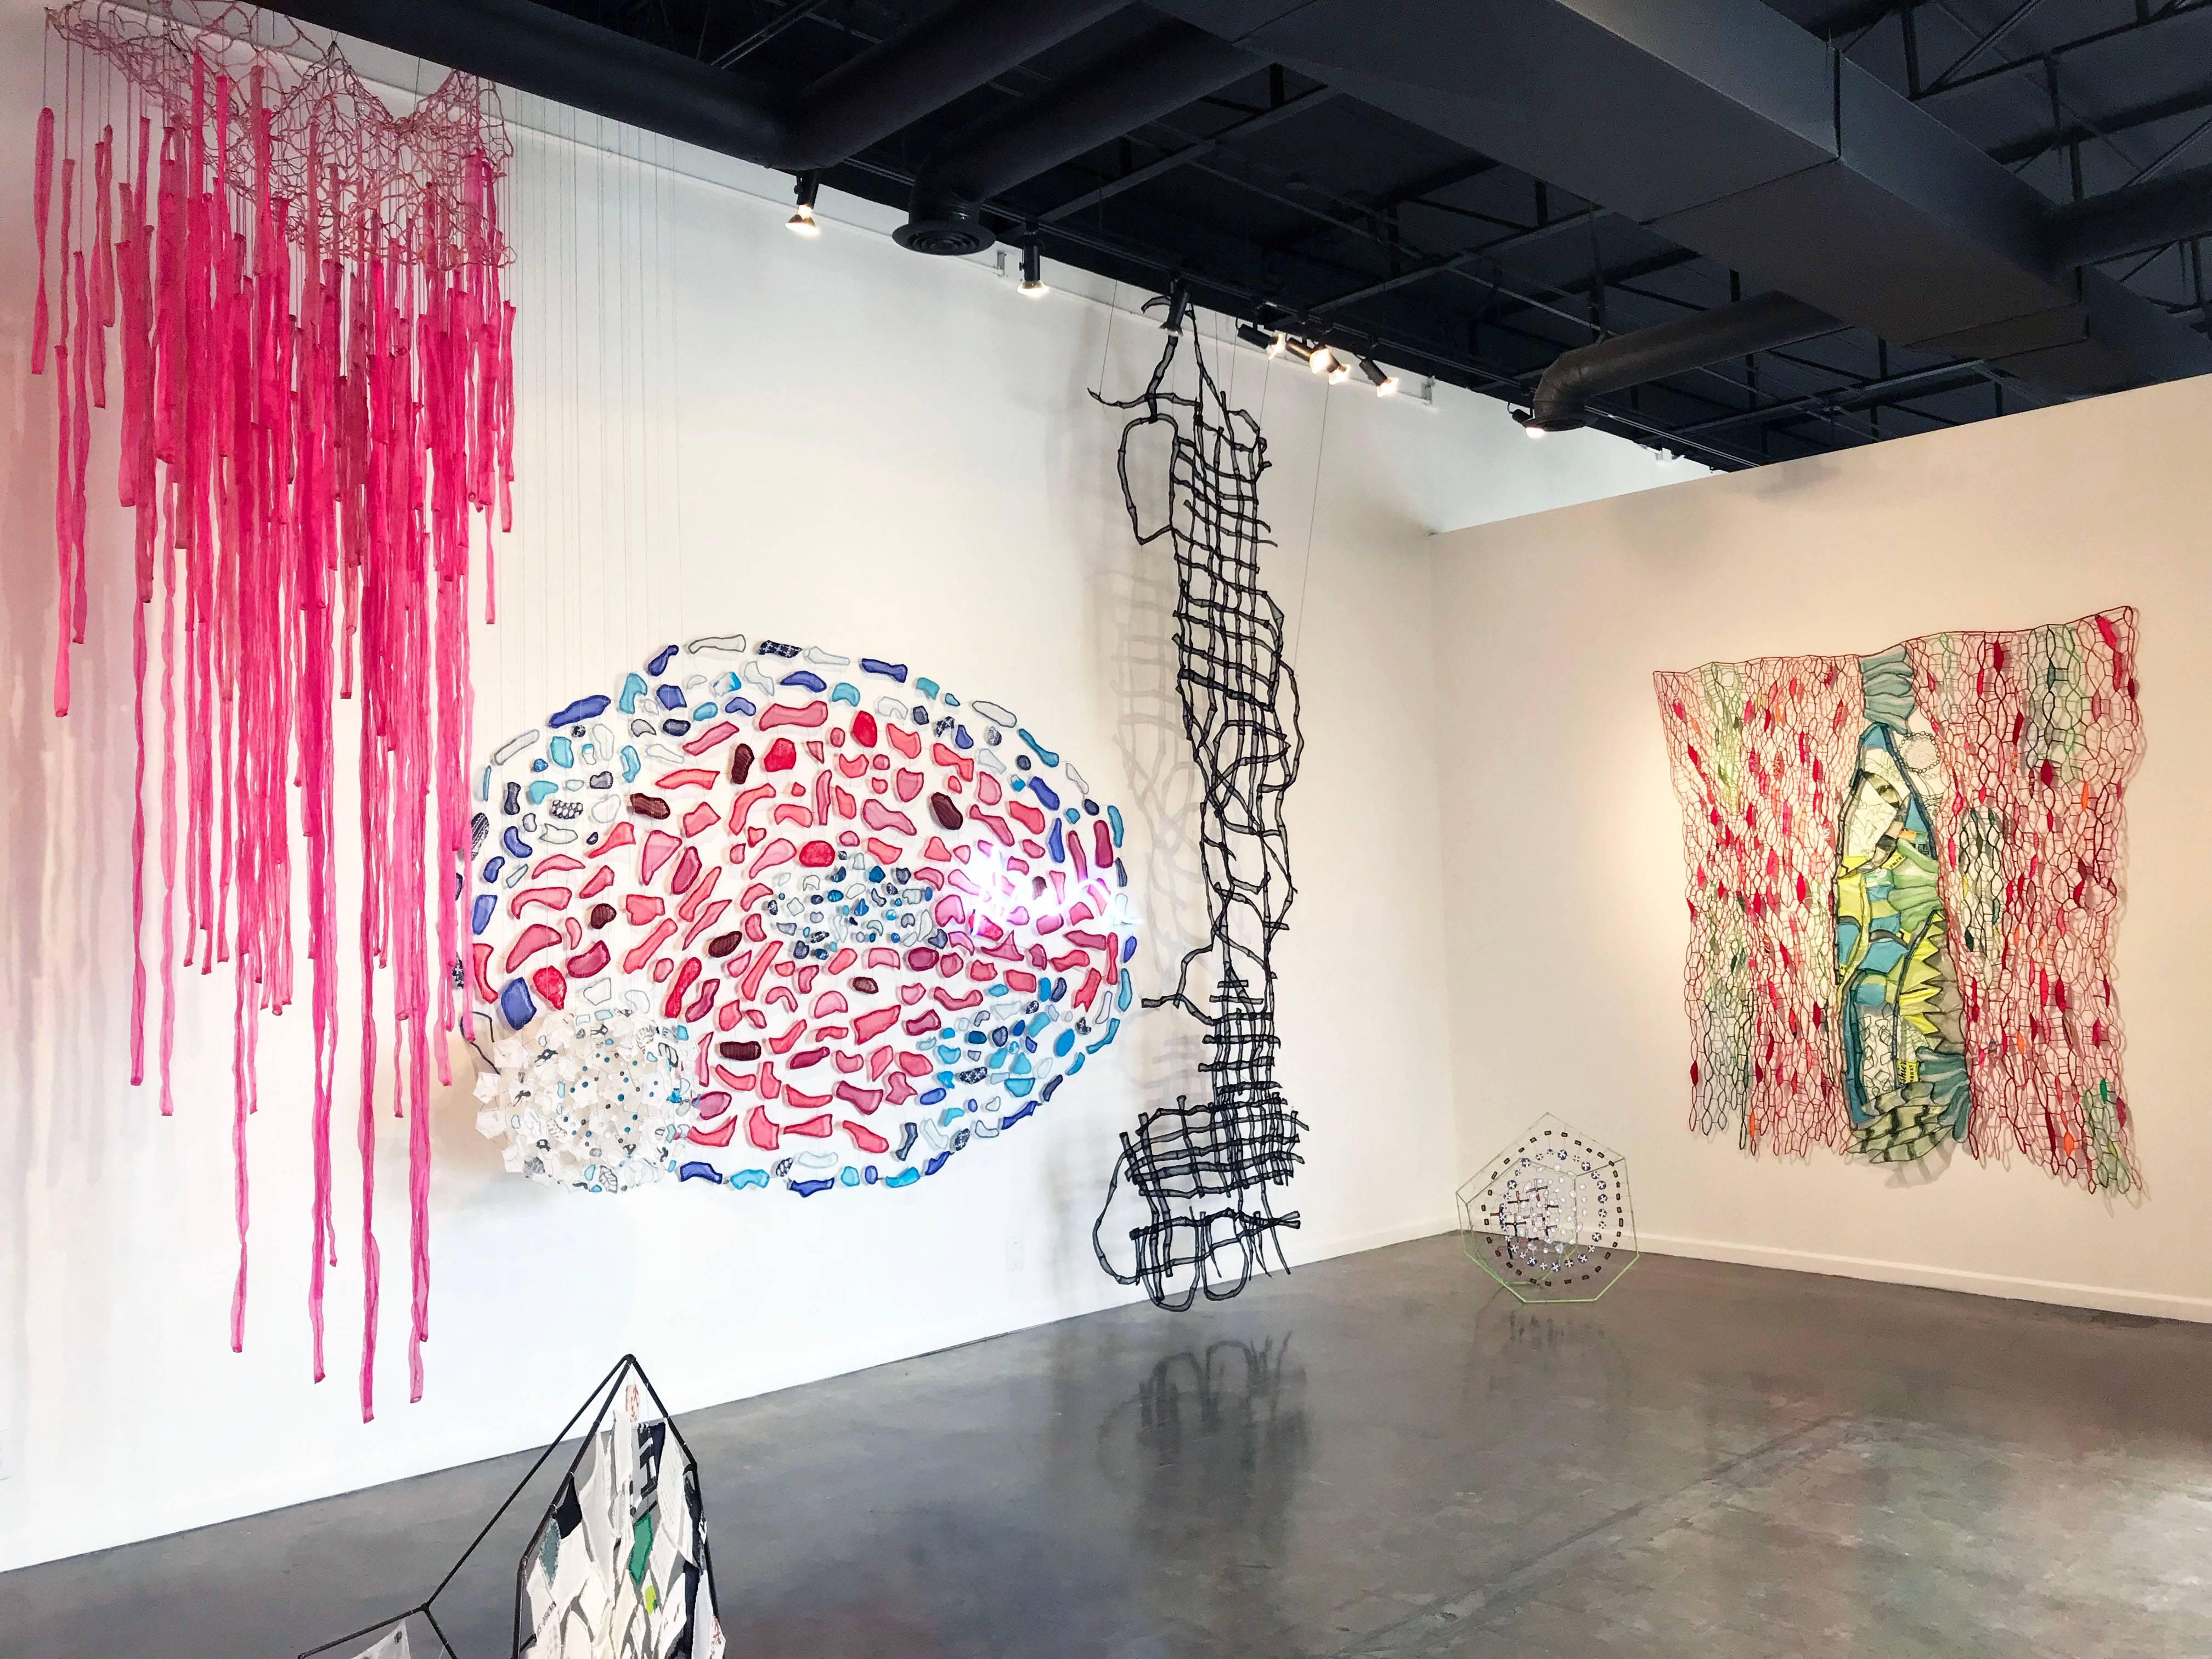 Wider Than The Sky, 2014-2016; 192 x 120 x 76”, fabric, plastic, thread, wire, pipe cleaners, fishing weights, neon; $12,000.

Caroline Lathan-Stiefel’s delicately-webbed “drawings-in-space” cover, divide, encircle, and fill
spaces. Often large in